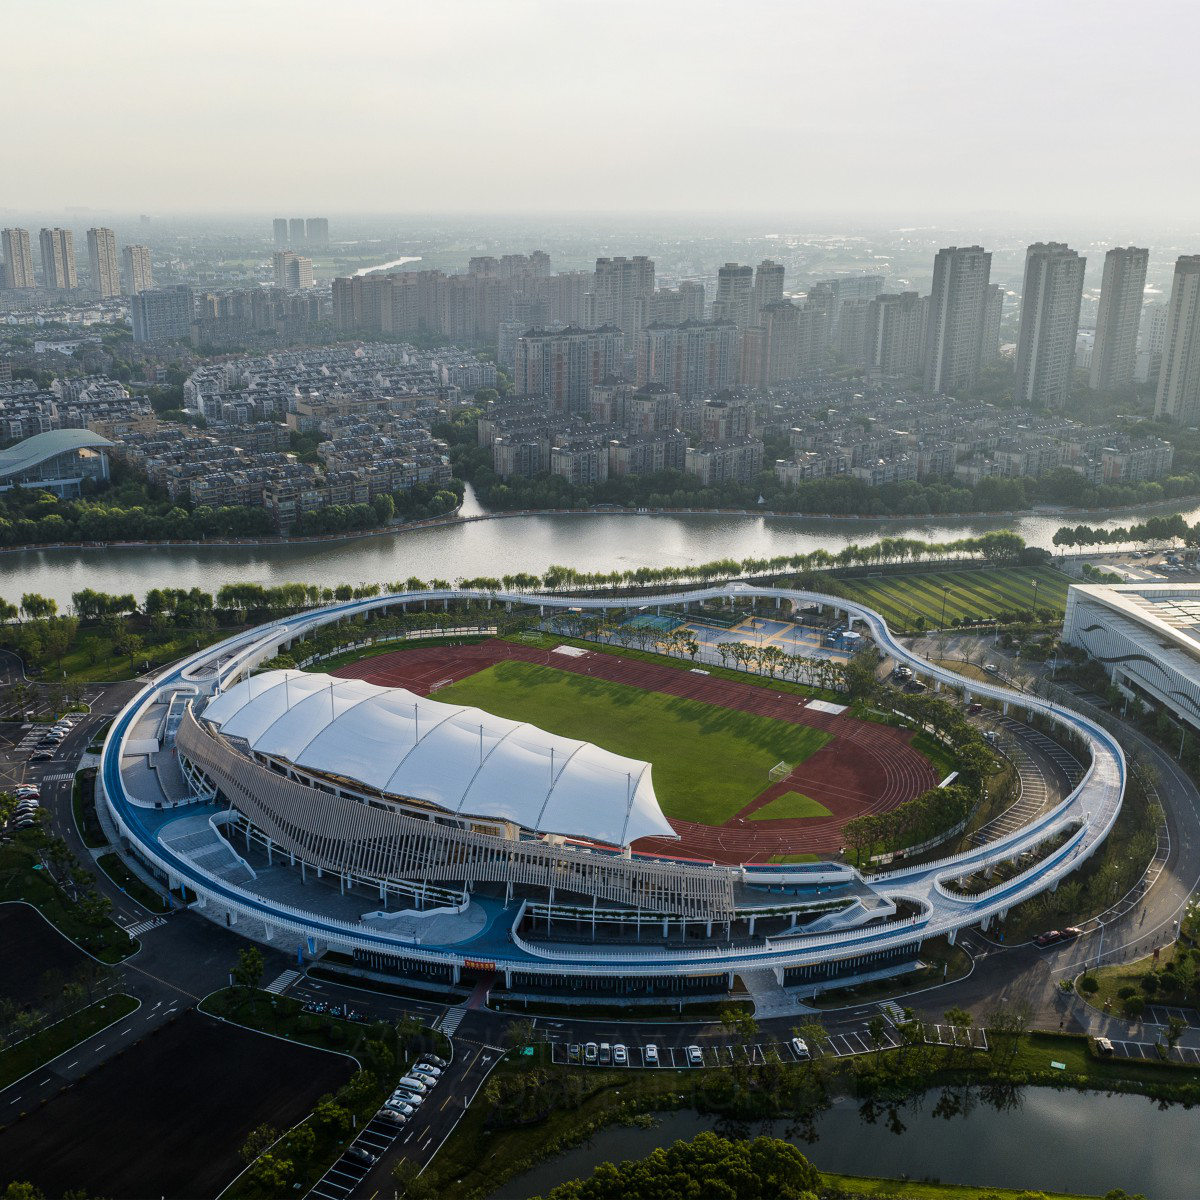 Zhejiang Pinghu Sports Center by Frederic Rolland, Jia Jiong and Wang Hanlu Golden Architecture, Building and Structure Design Award Winner 2024 